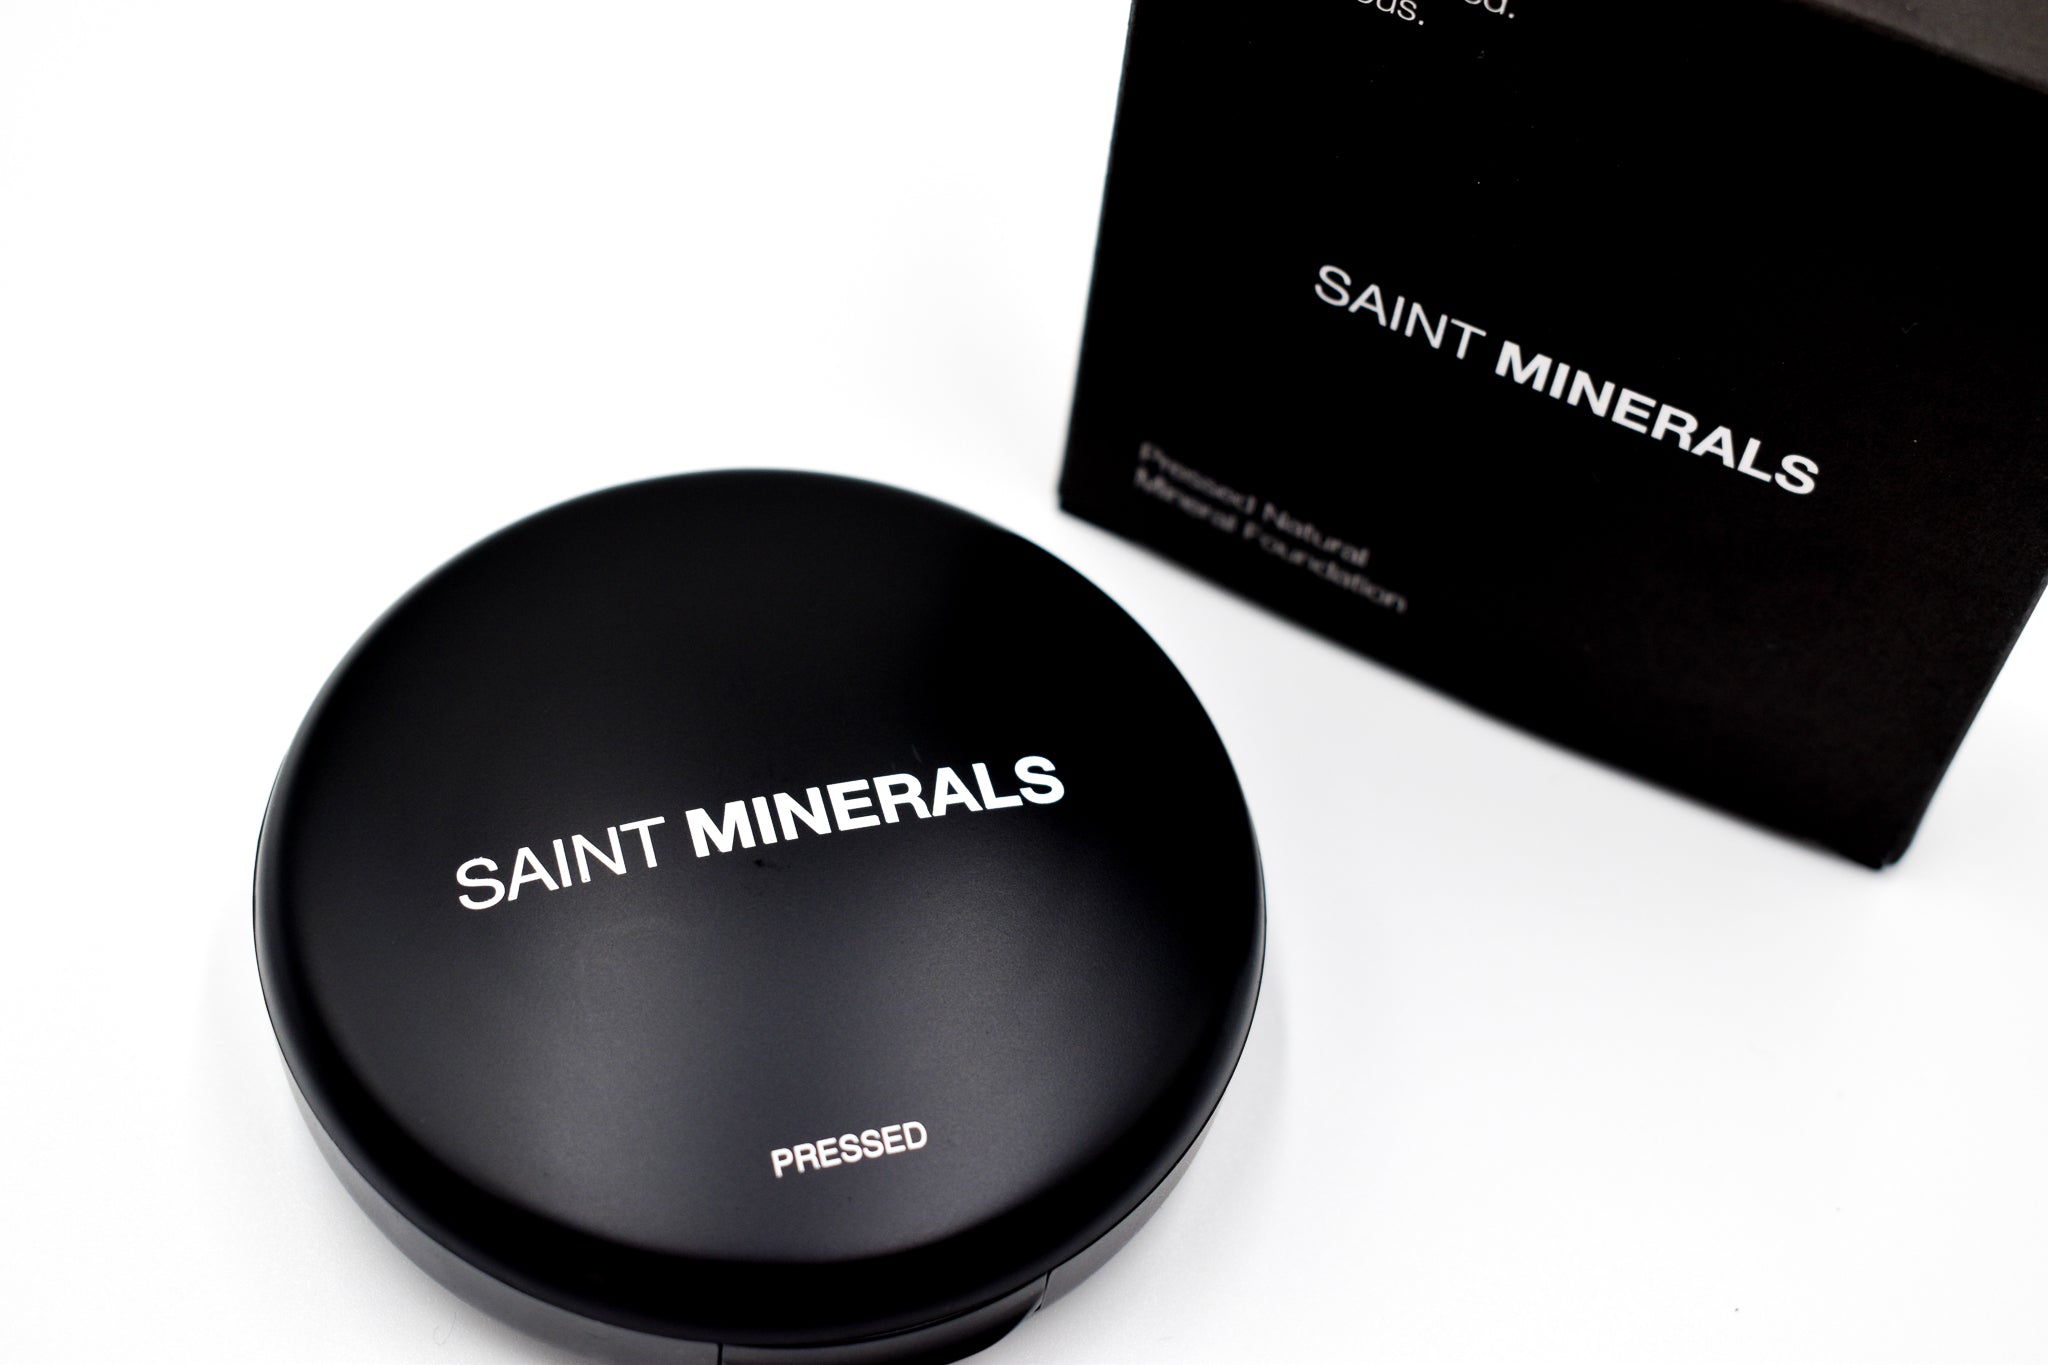 SAINT MINERALS Pressed Foundation - Panoply Beauty 